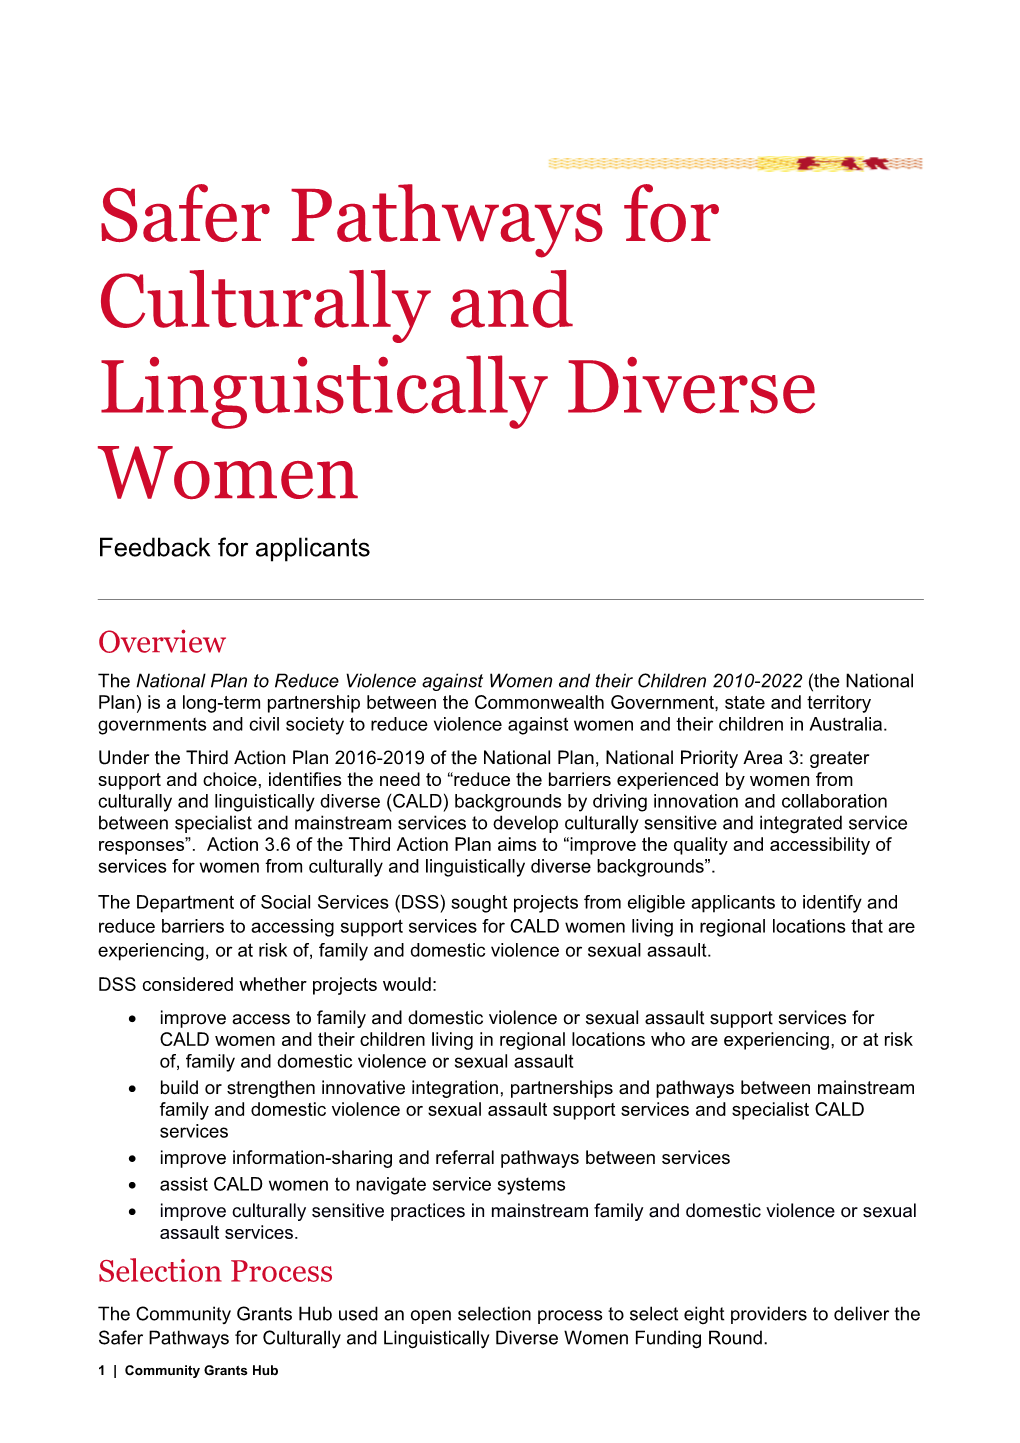 Safer Pathways for Culturally and Linguistically Diverse Women